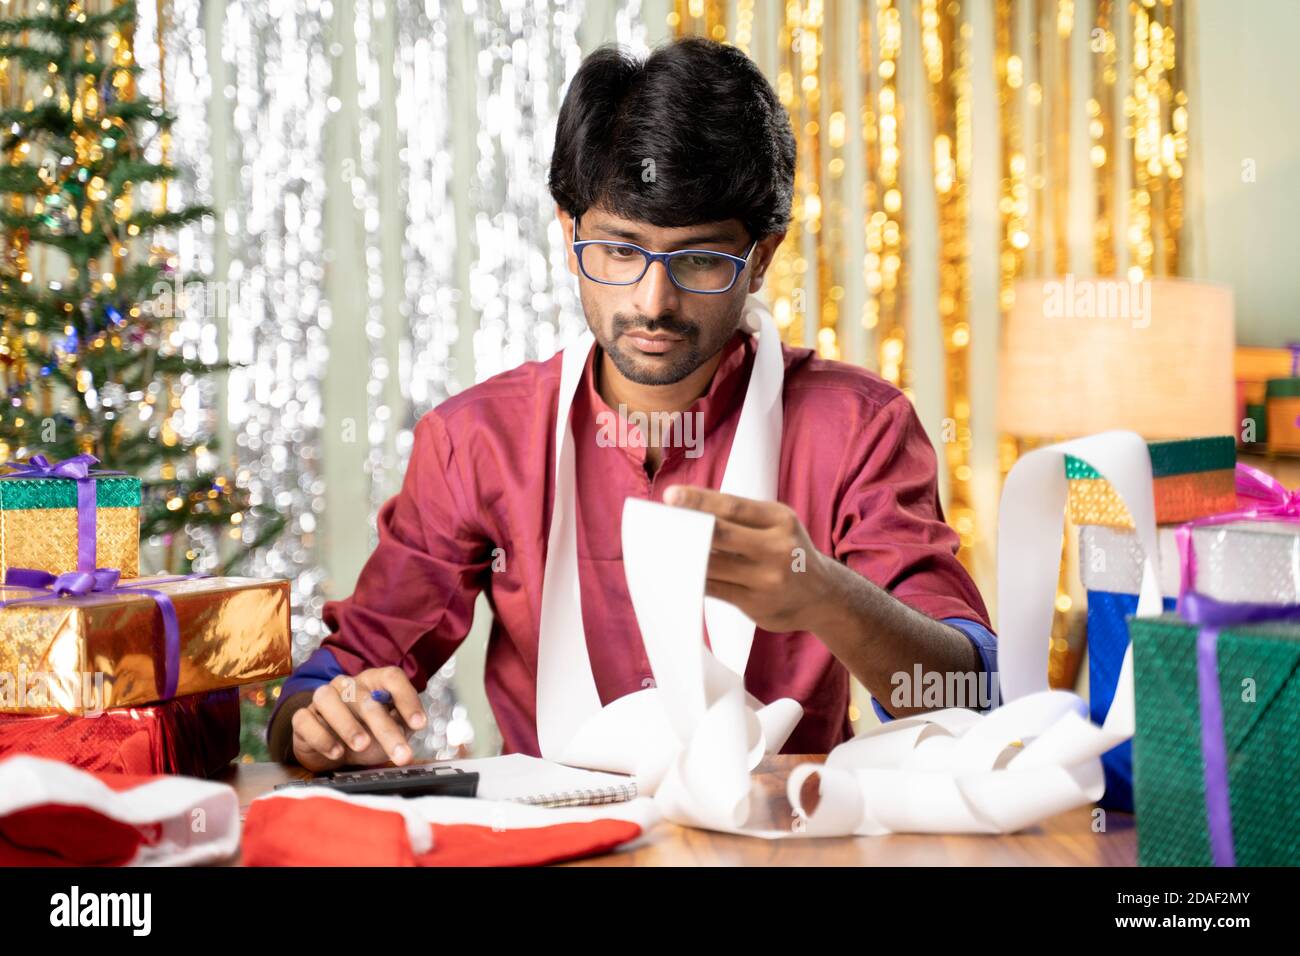 Young man busy in calculating holyday expenses after Christmas or new year 2021 holiday celebration showing with decorated background with gift in Stock Photo